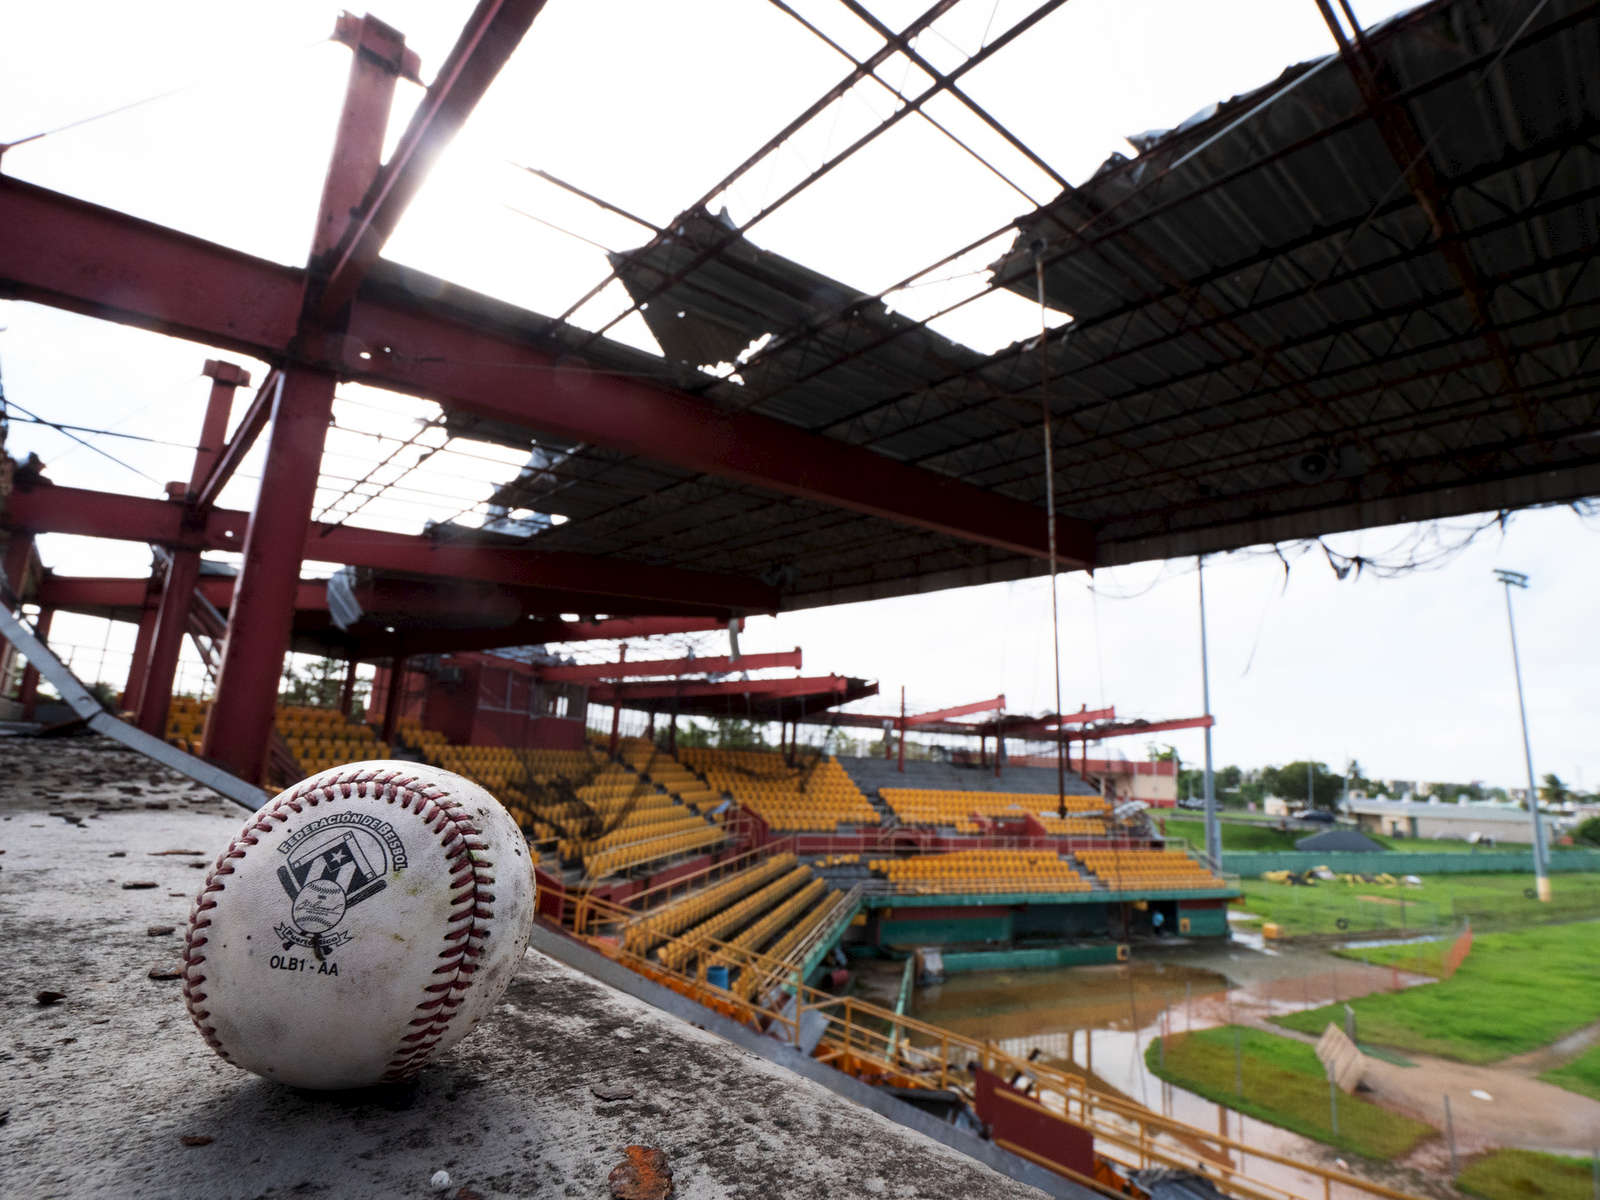 CAROLINA, PUERTO RICO - NOVEMBER 13:  A baseball sits in the stands at the Roberto Clemente Municipal Stadium on November 13, 2018 in Carolina, Puerto Rico. The ballpark was once used for minor league AA baseball.  The stadium is set to be demolished due to the extended damage it sustained from Hurricane Maria.  The effort continues in Puerto Rico to remain and rebuild more than one year after the Hurricane Maria hit and devastated the island on September 20, 2017. The official number of deaths from the disaster is 2,975. 